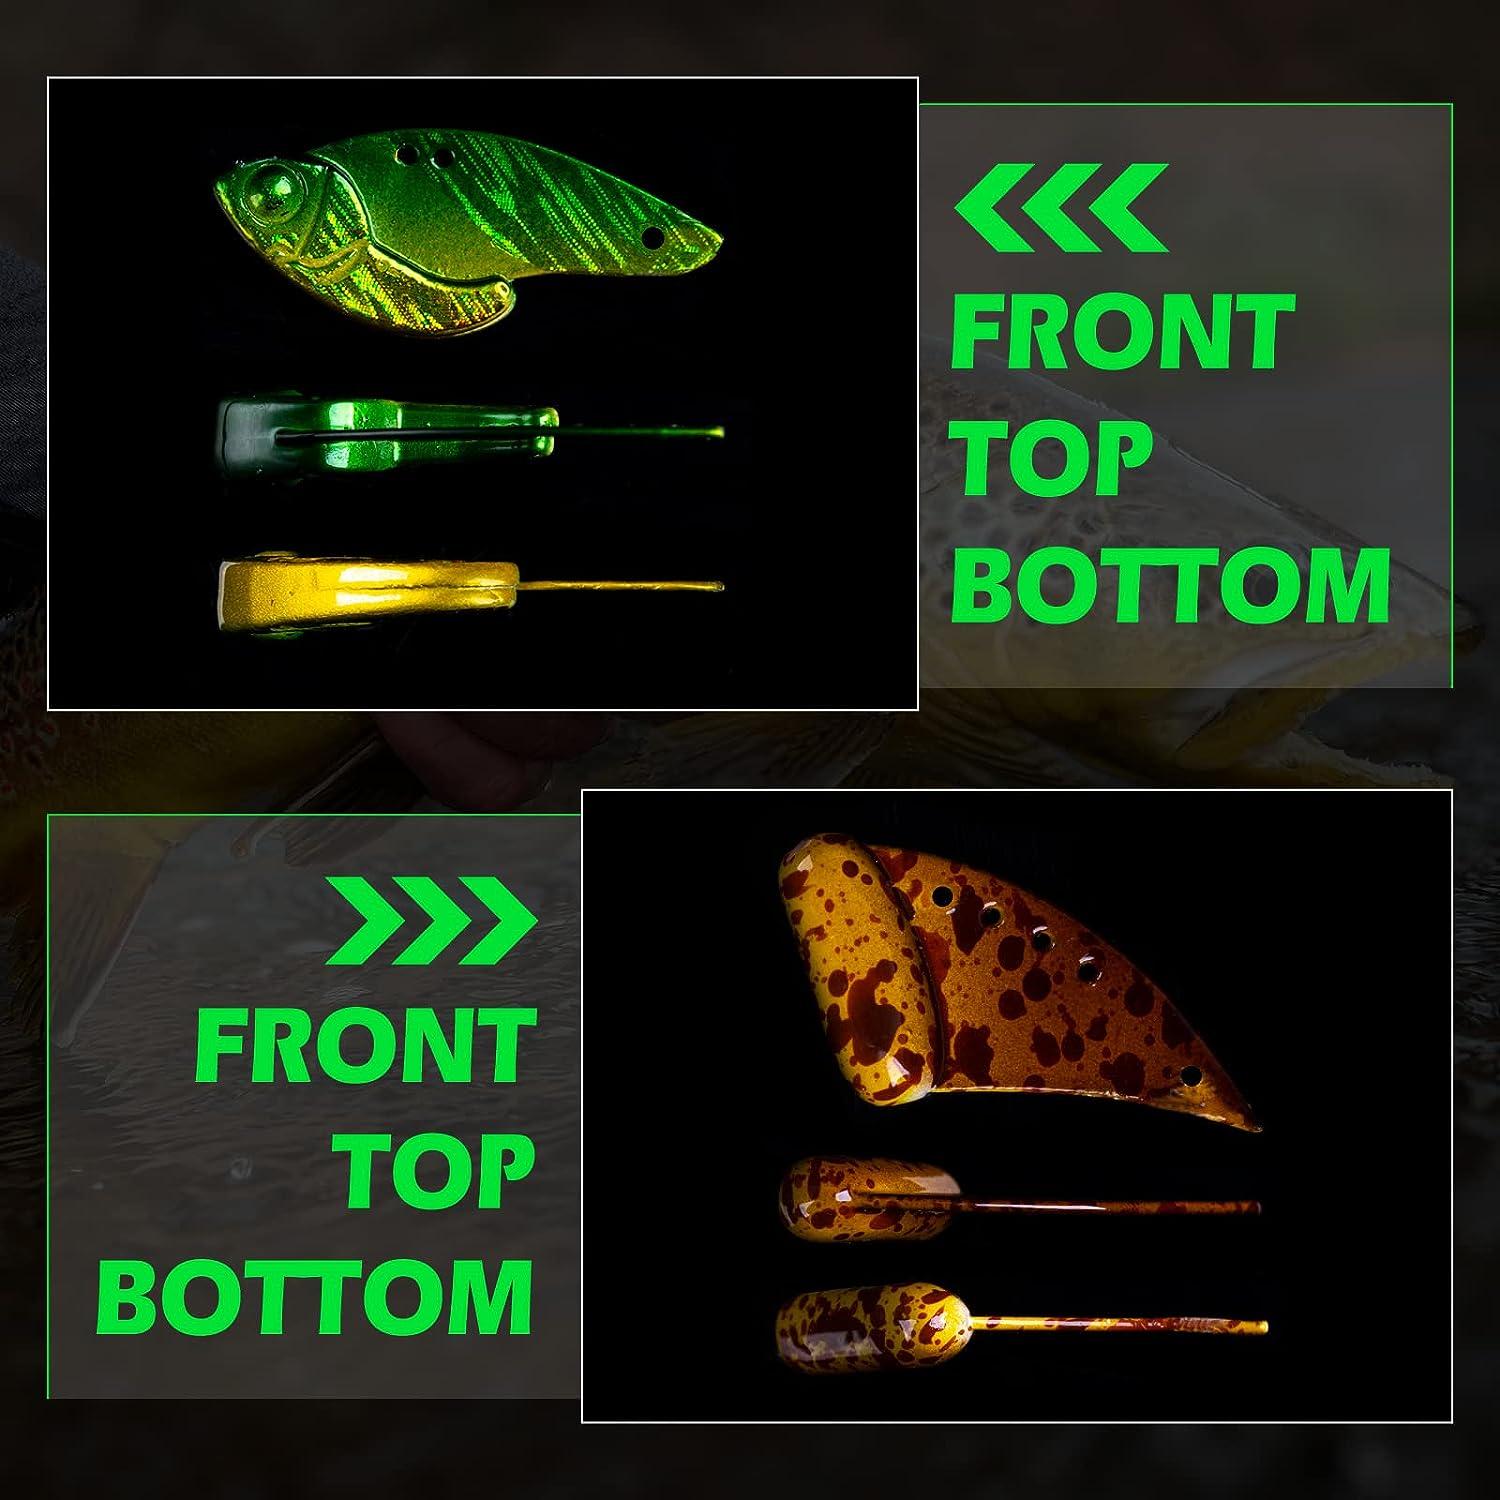 Goture Fishing Lures Fishing Spoons,Hard Lures Saltwater Spoon Lures  Casting Spoon/Ice Fishing Jigs for Trout Bass Pike Walleye Crappie Bluegill  1/10oz 1/8oz 1/7oz 1/6oz 1/5oz E-3 Patterns-12pcs 12pcs fishing spoons with  tackle